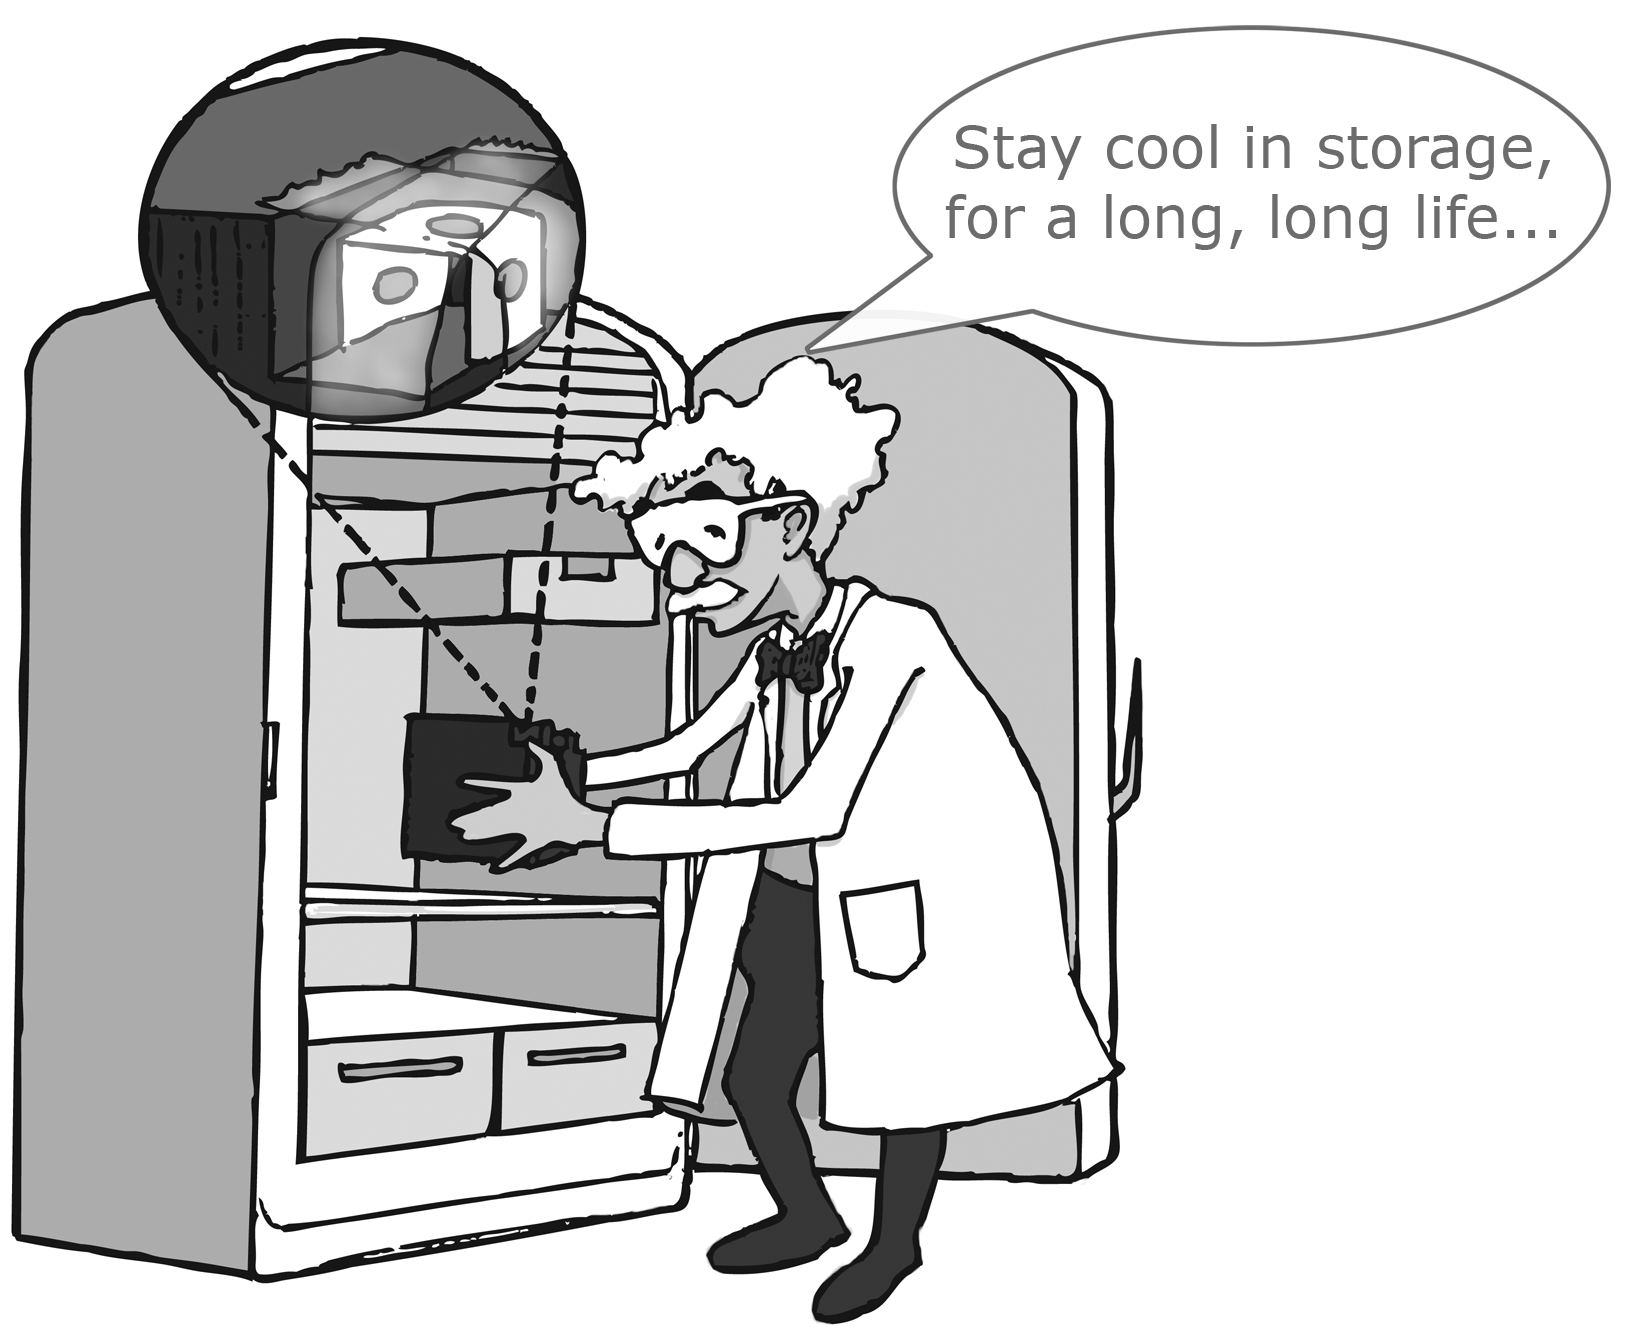 Dr Shock Says "Stay Cool in STorage, for a long, long life..."